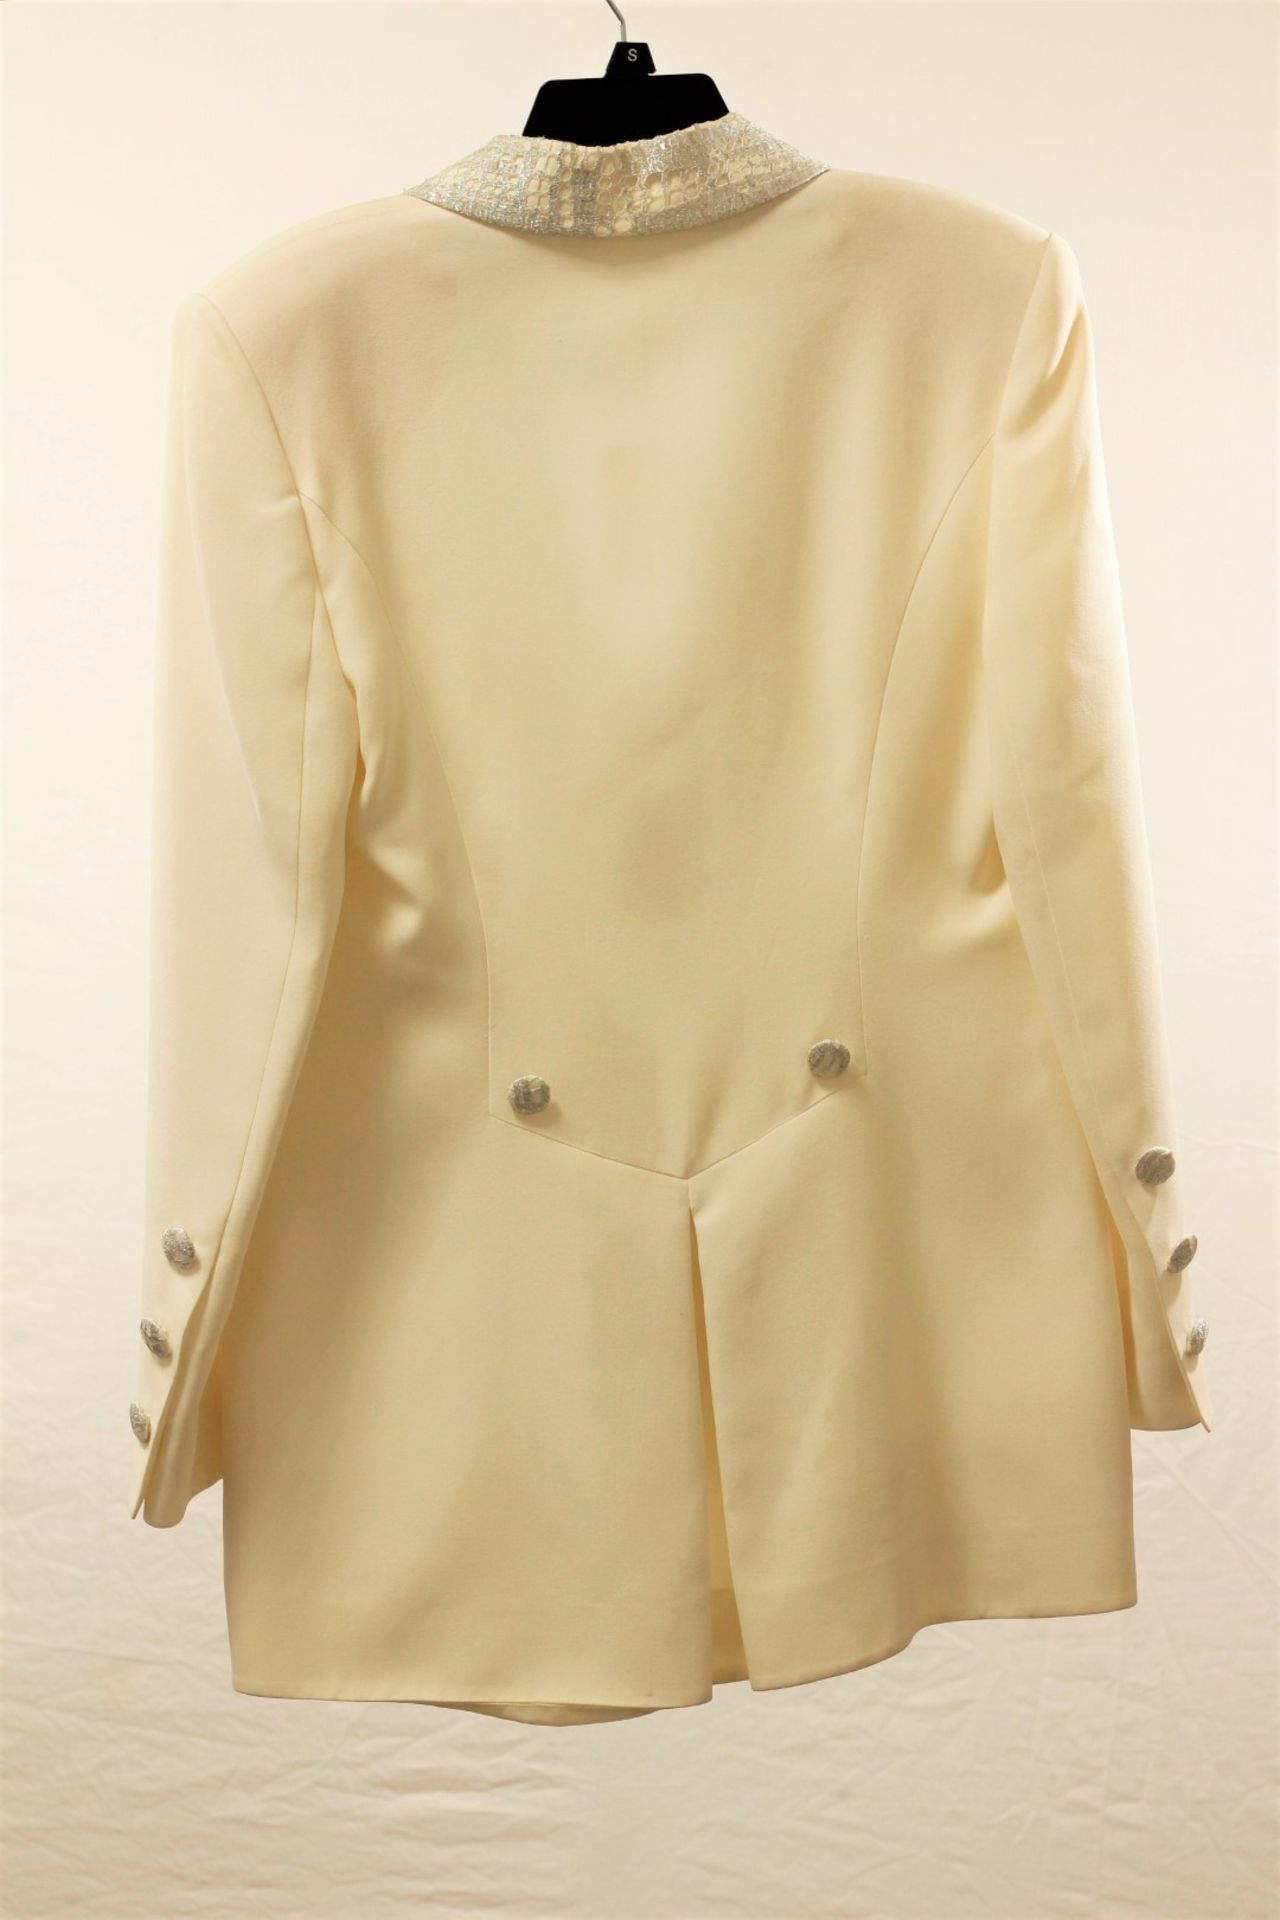 1 x Boutique Le Duc Cream Jacket - Size: 16 - Material: 52% Viscose, 48% Acetate - From a High End - Image 8 of 17